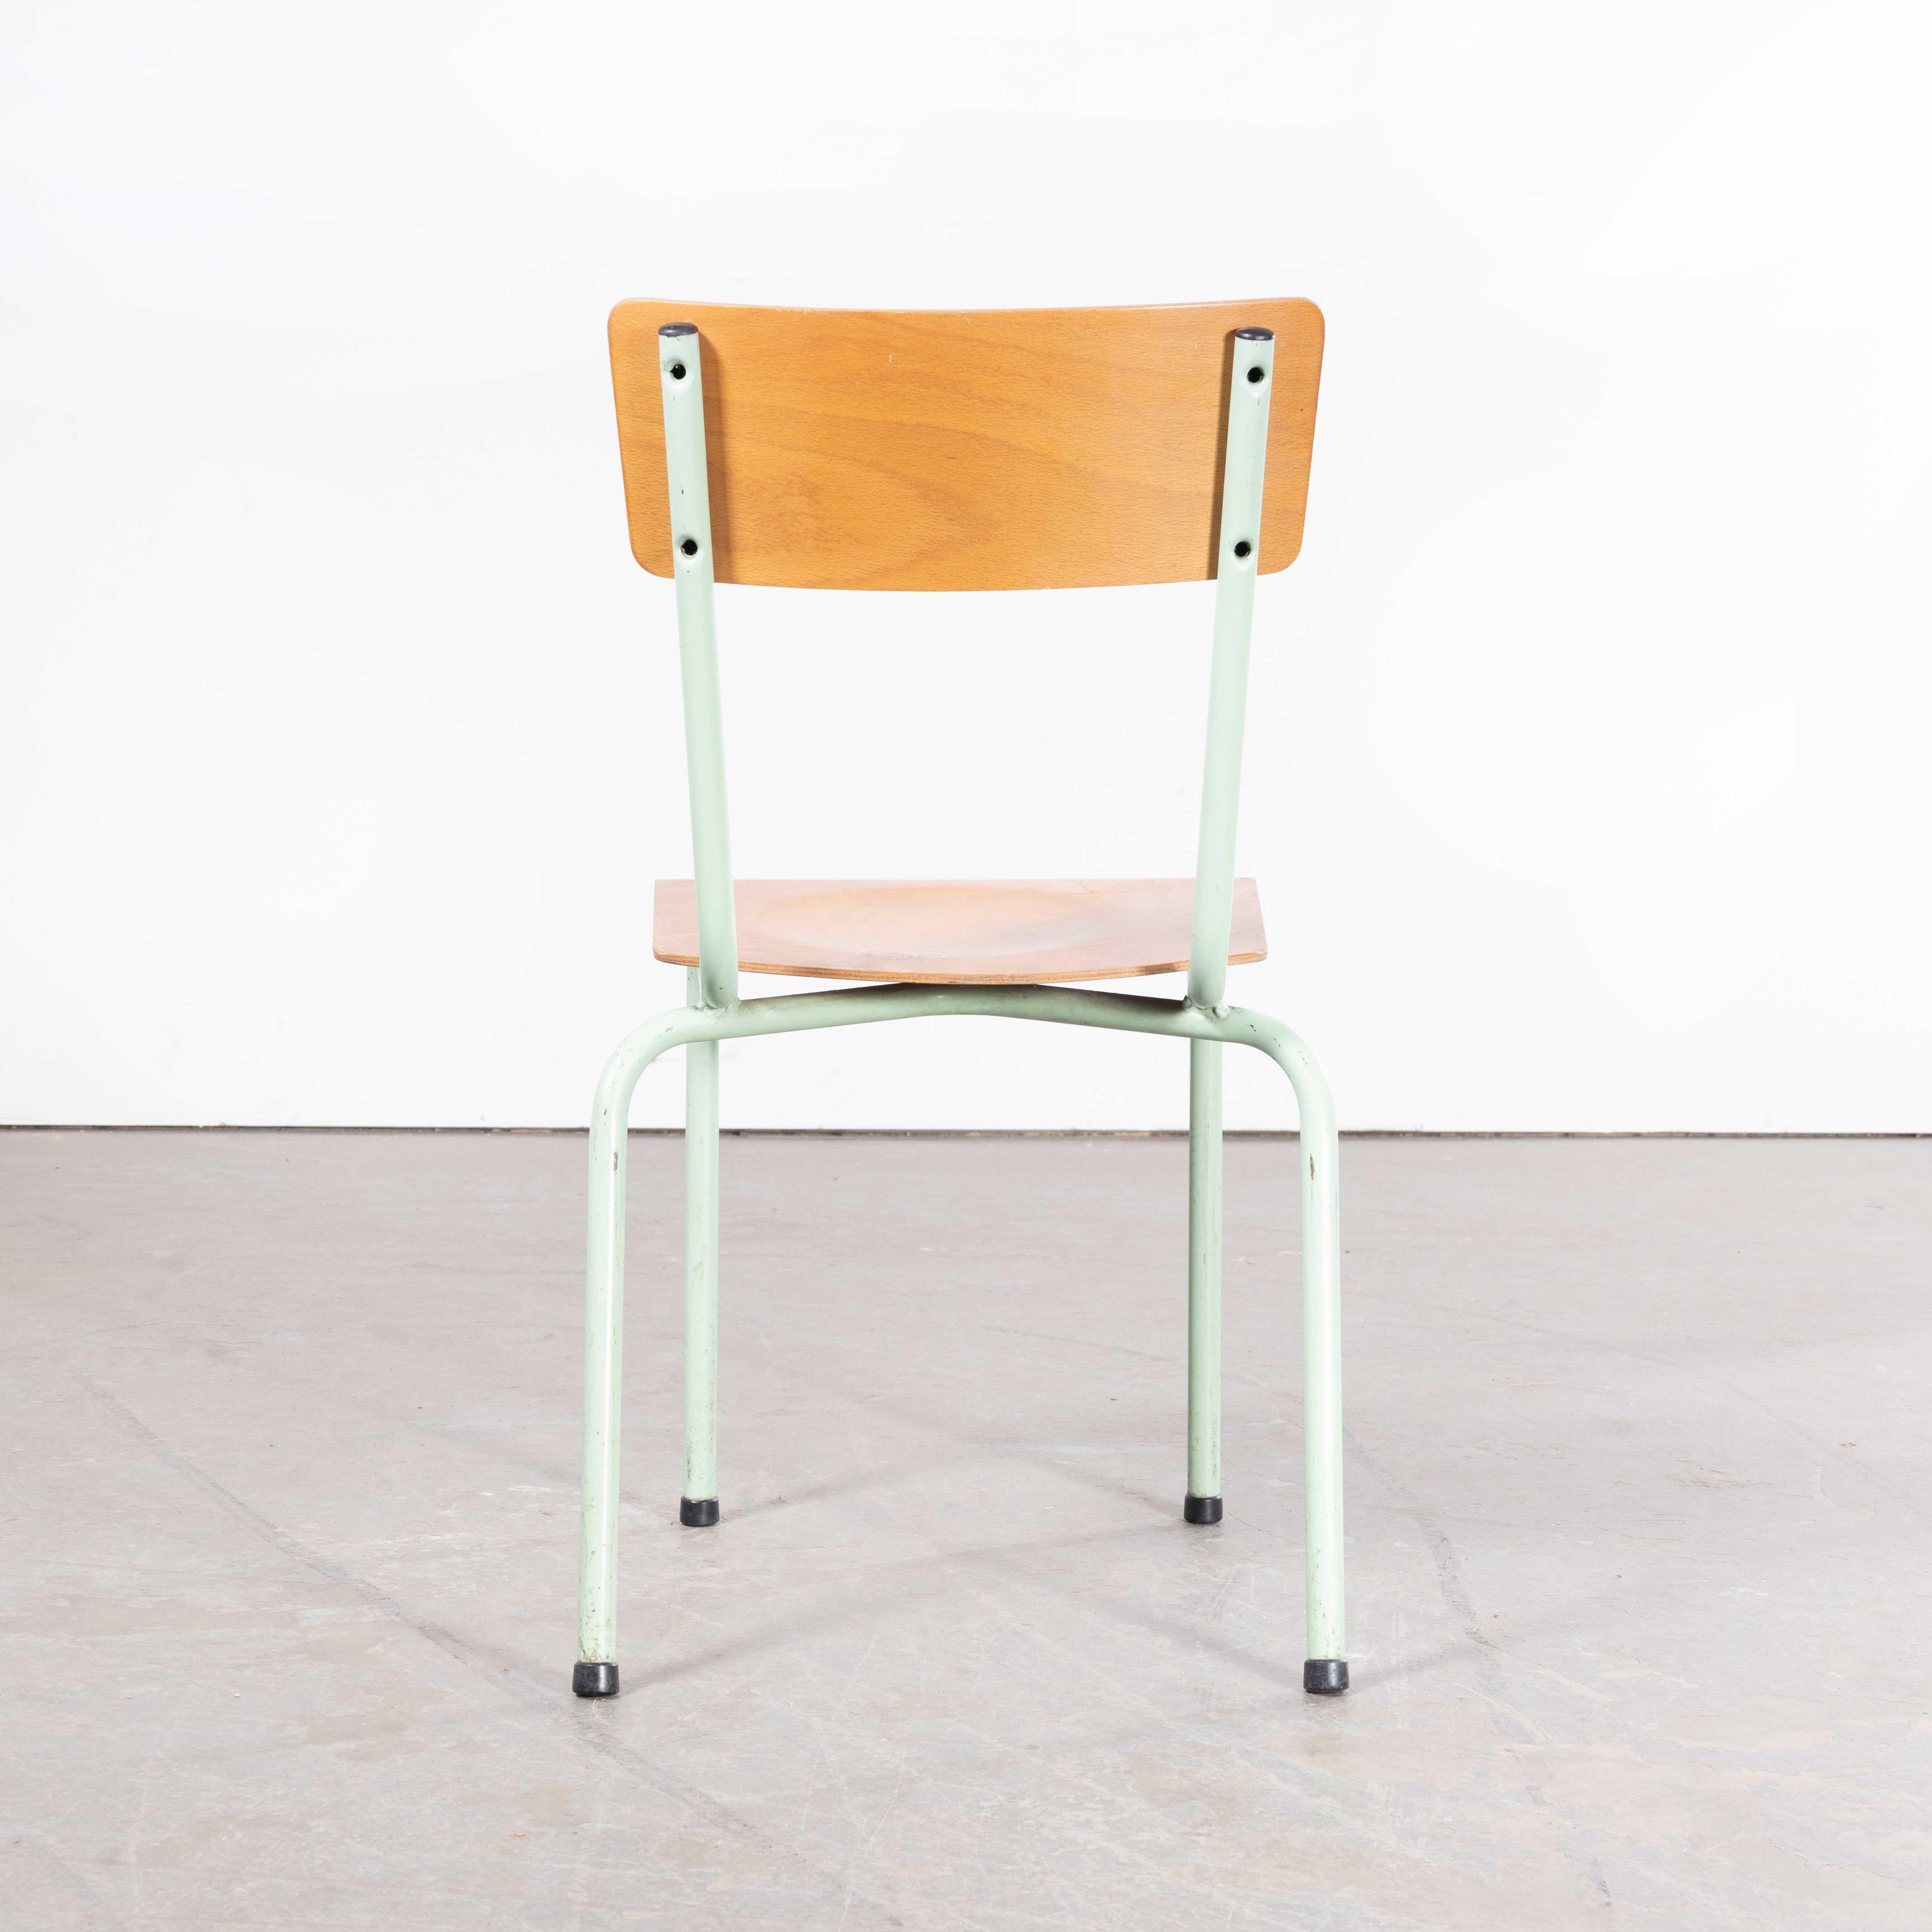 1960’s Original Mint French Stacking University Chairs Wide Back – Set Of Six
1960’s Original Mint French Stacking University Chairs Wide Back – Set Of Six. High quality classic French University chairs. Mint steel frames with clean birch backs and